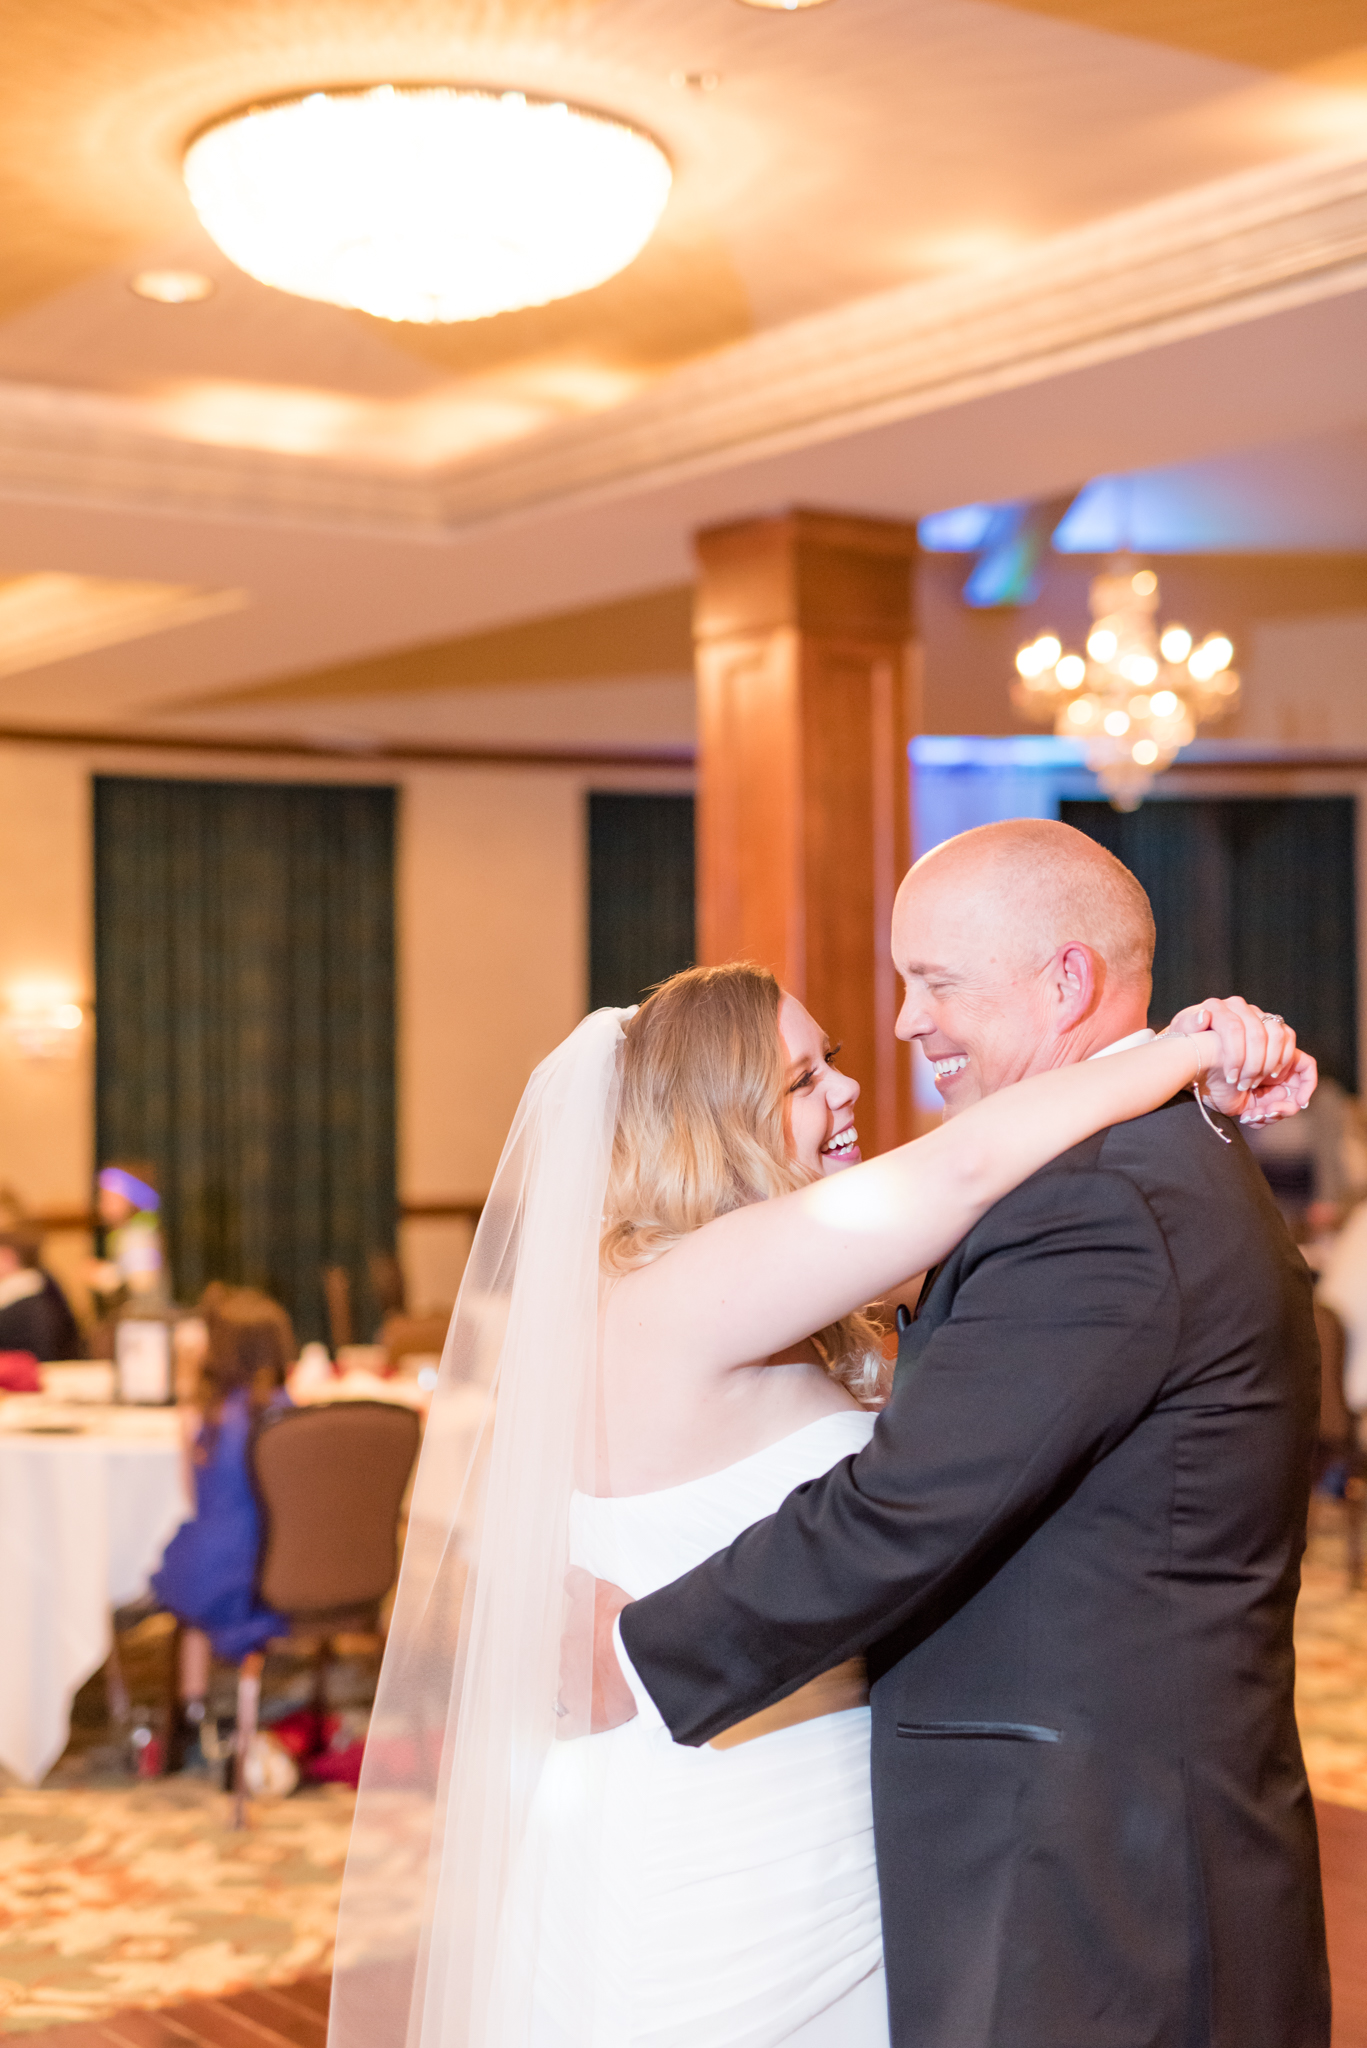 Bride and father laugh during dance.